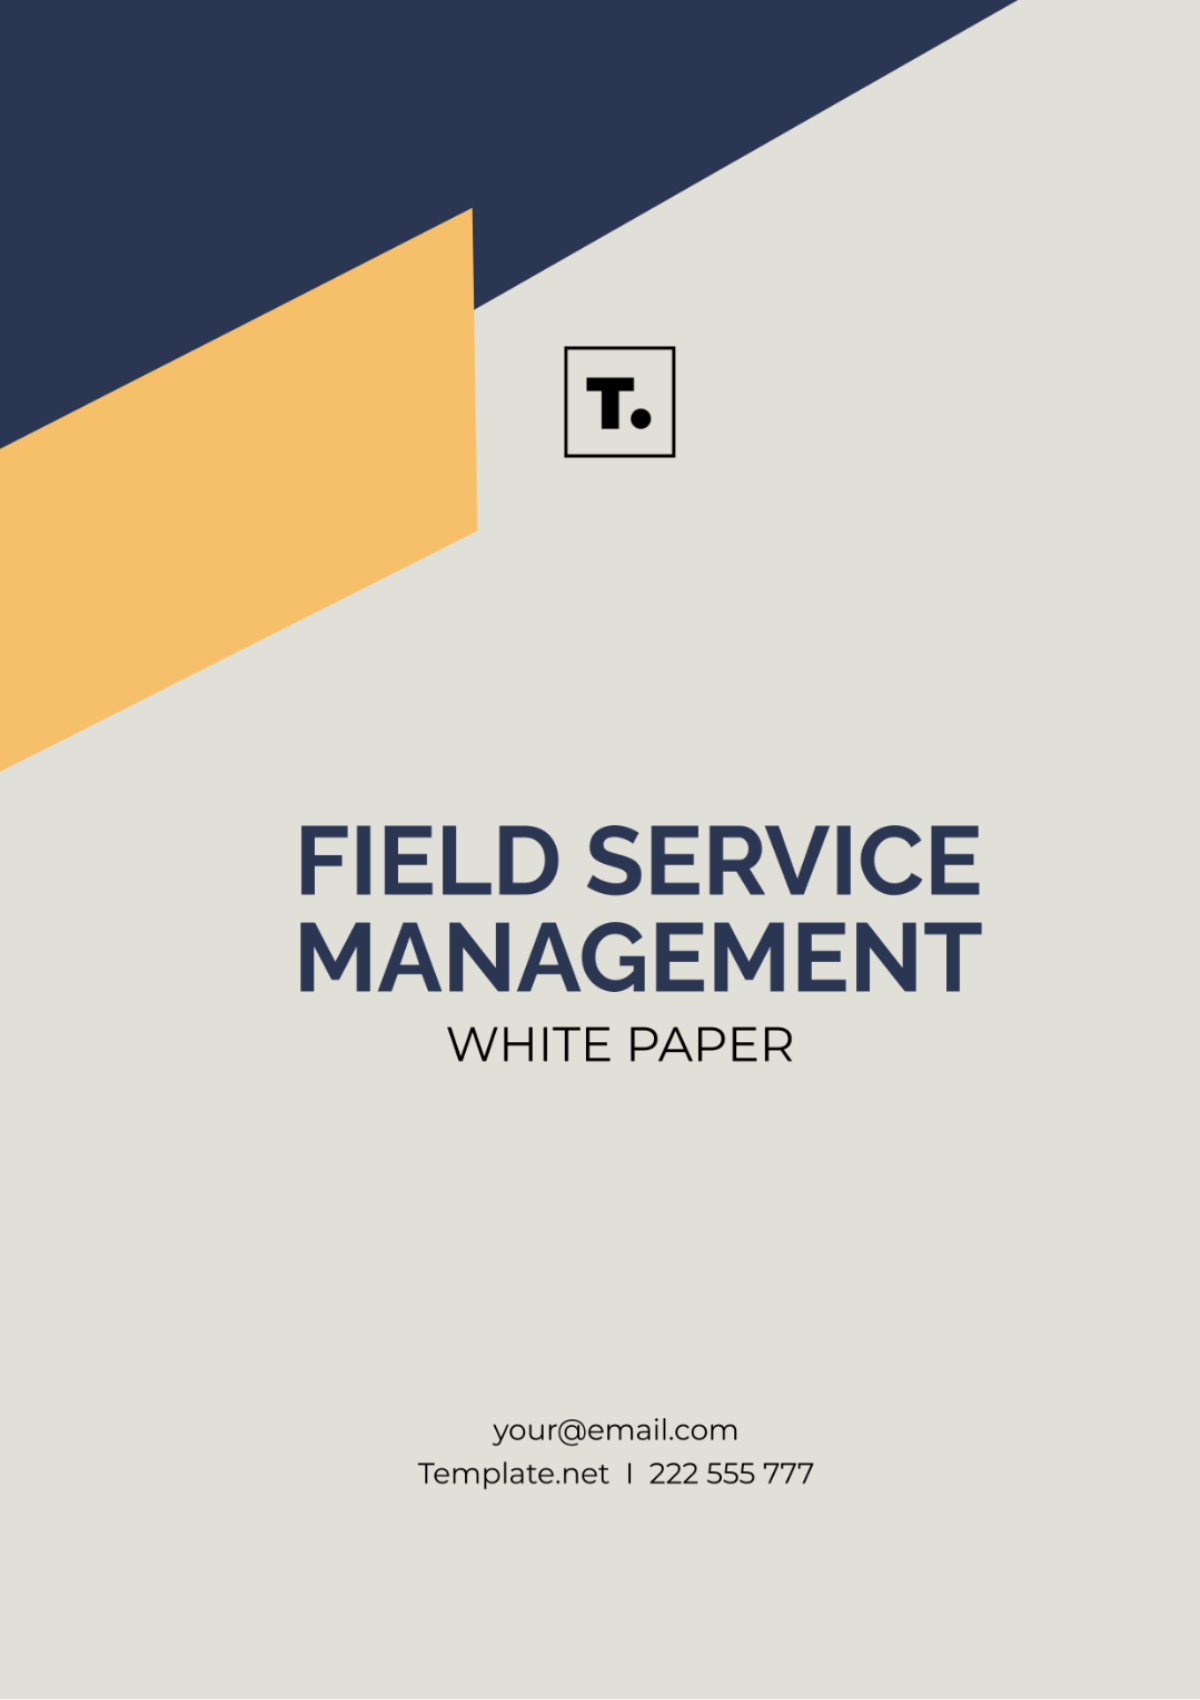 Field Service Management White Paper Template